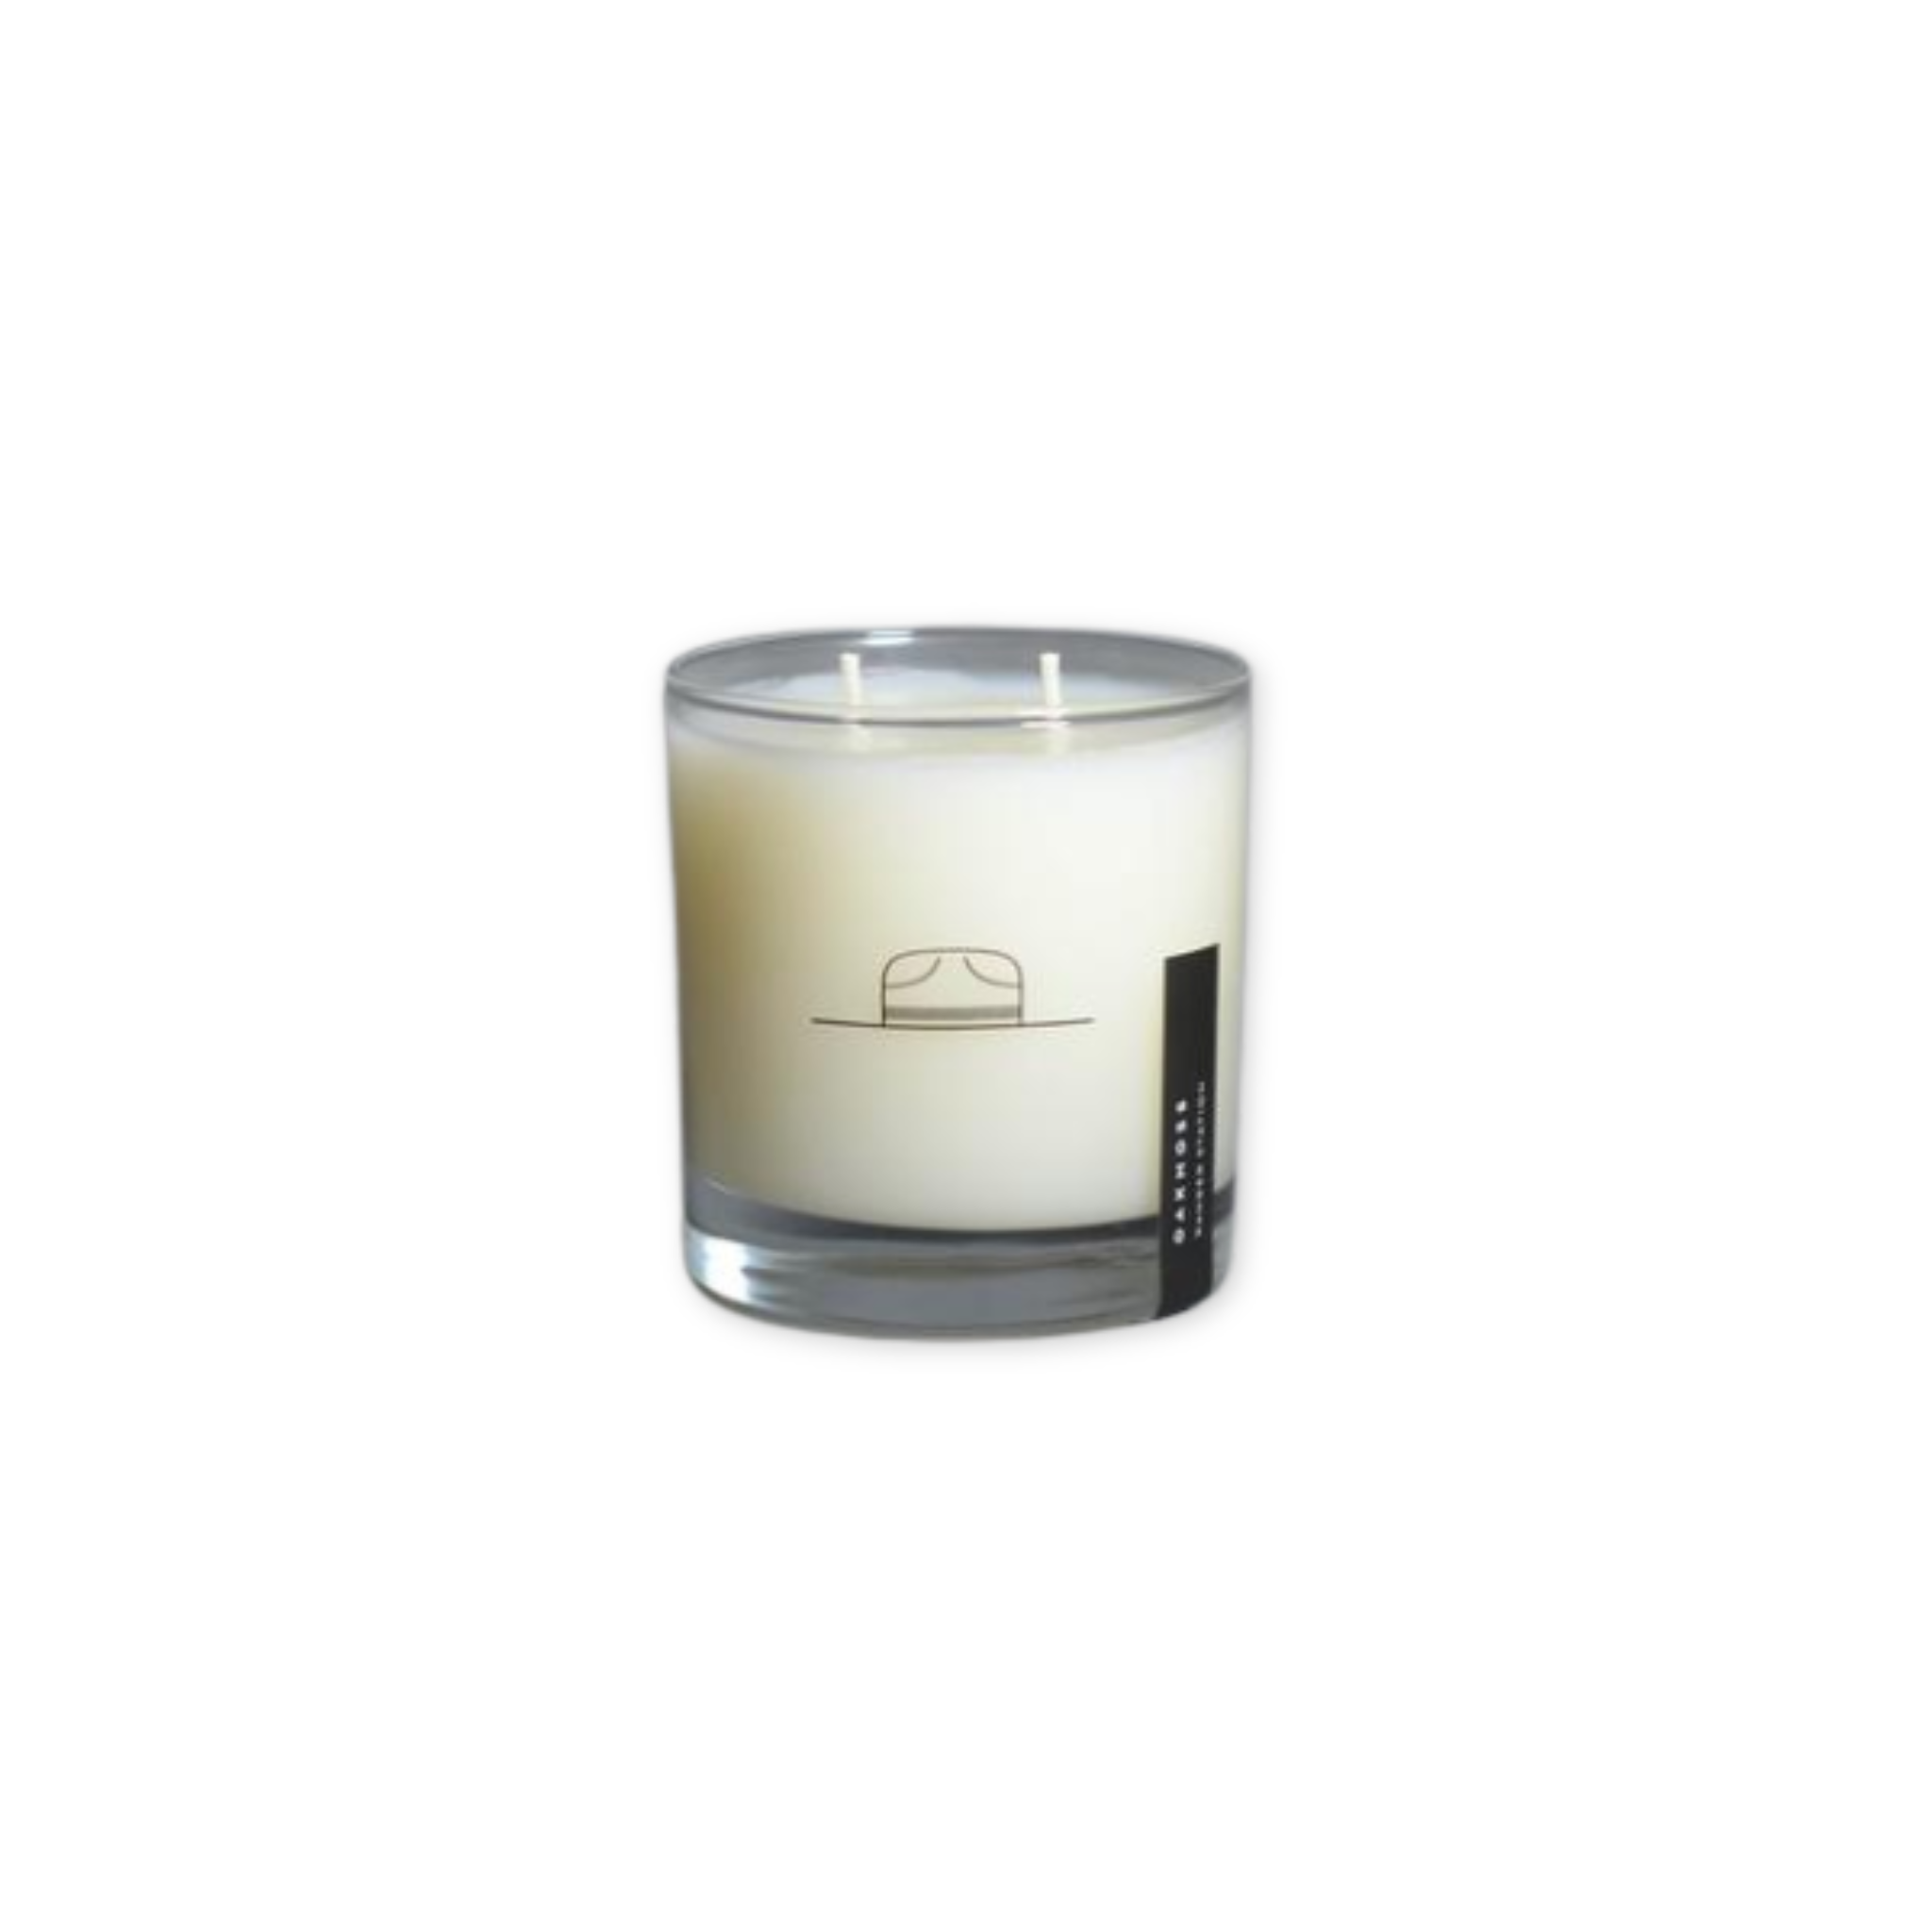 bergamot sage and pine scented candle